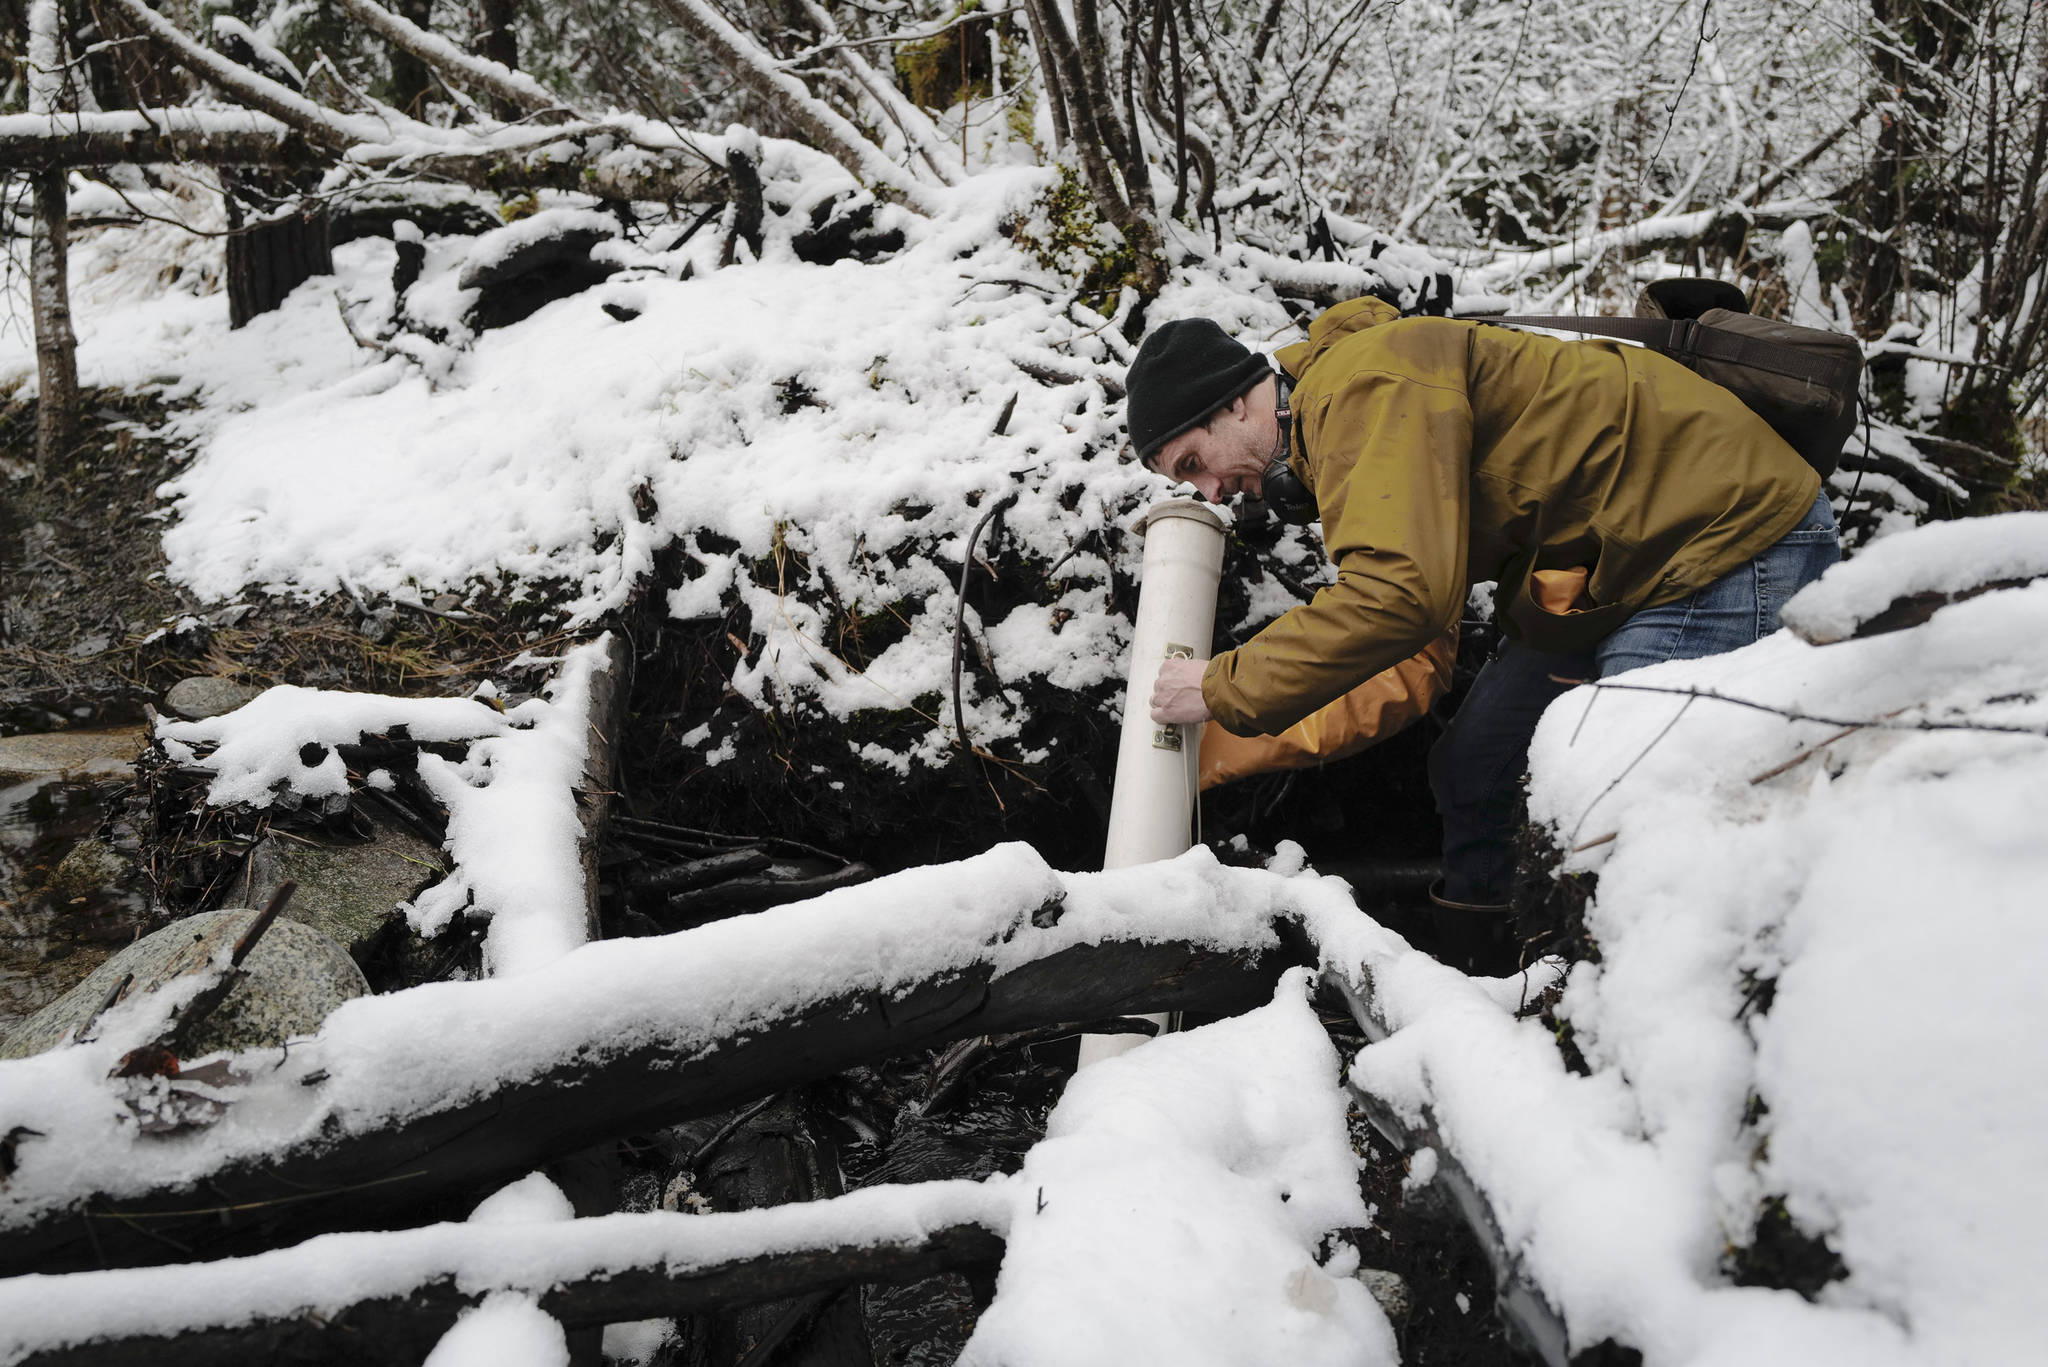 Jake Musslewhite, a fisheries biologist with the U.S. Forest Service, searches for a radio tag used in a study tracking adult coho salmon in the Dredge Lakes drainage system. (Michael Penn | Juneau Empire)